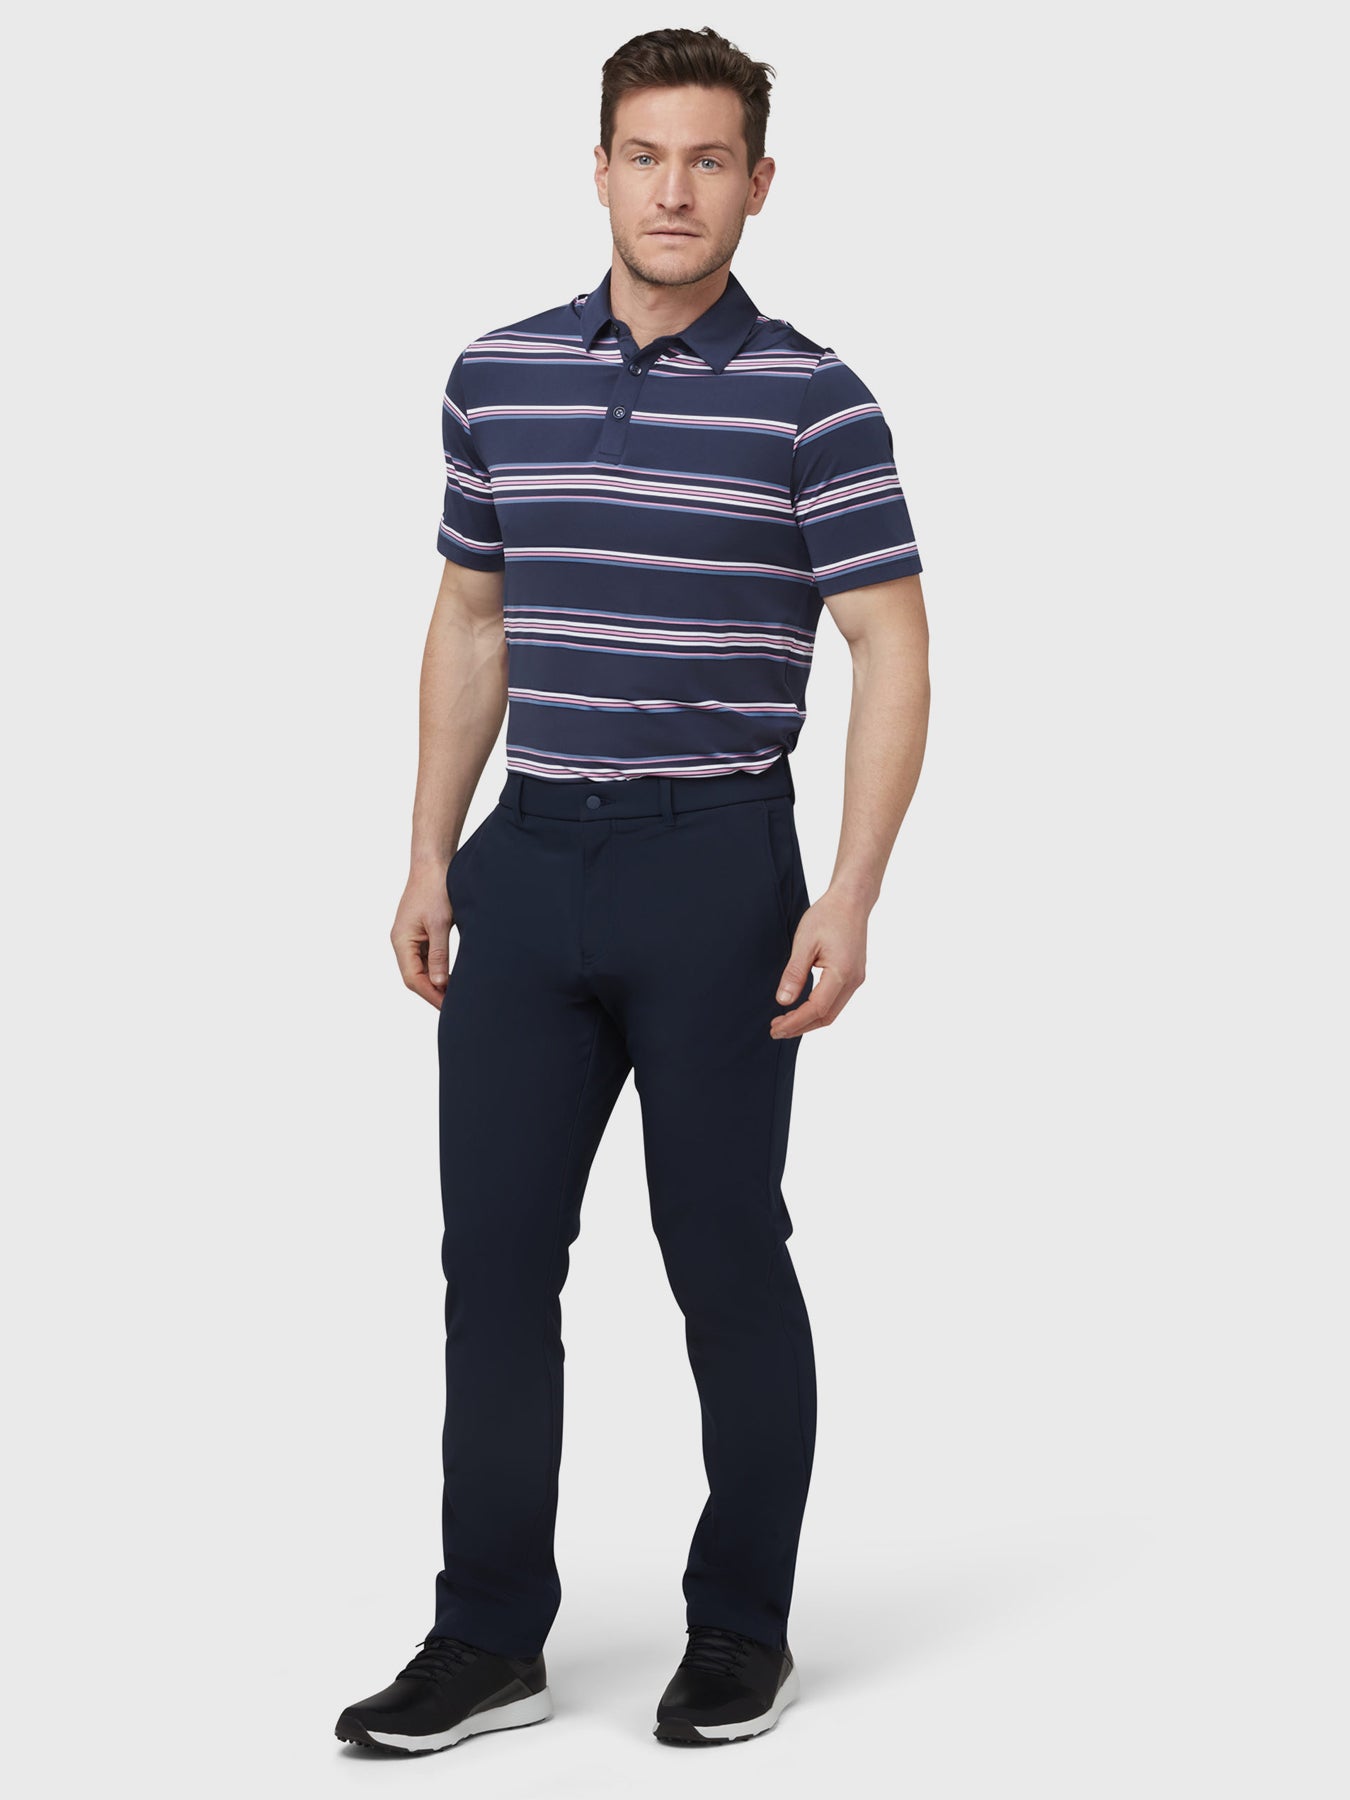 View Resort Ventilated Stripe Golf Polo In Peacoat Peacoat M information